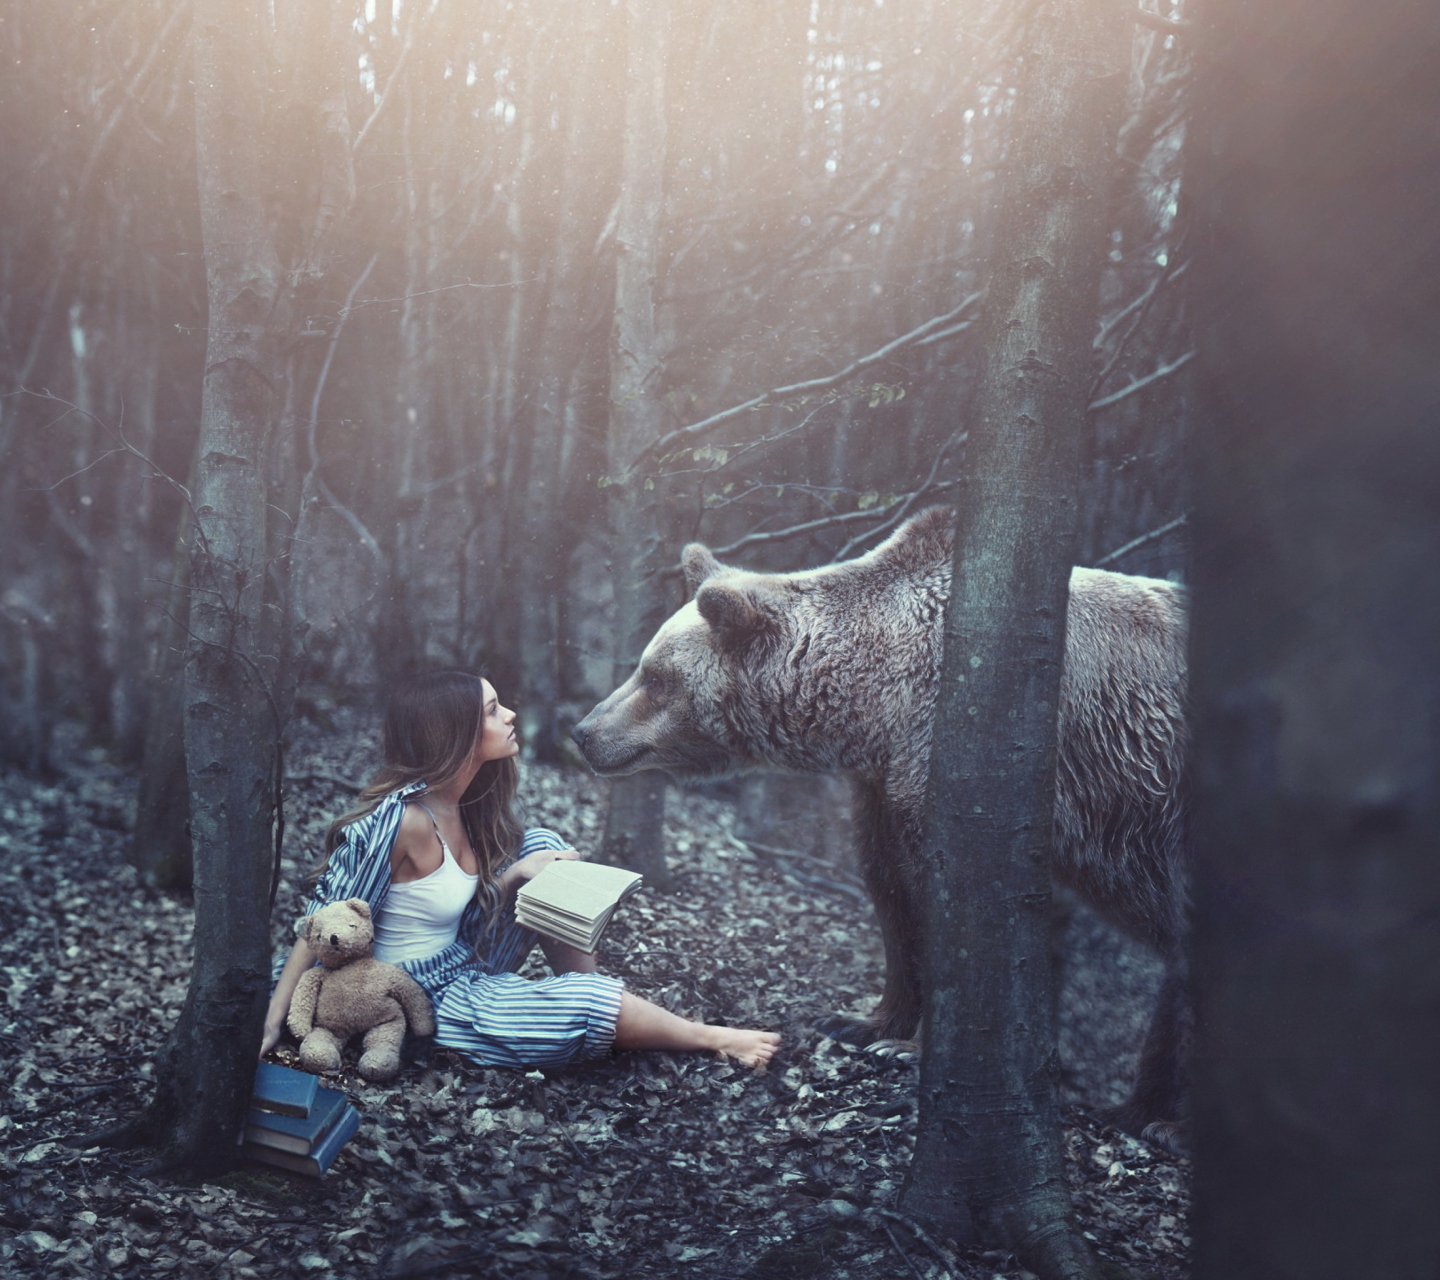 Girl And Two Bears In Forest By Rosie Hardy Photographer wallpaper 1440x1280